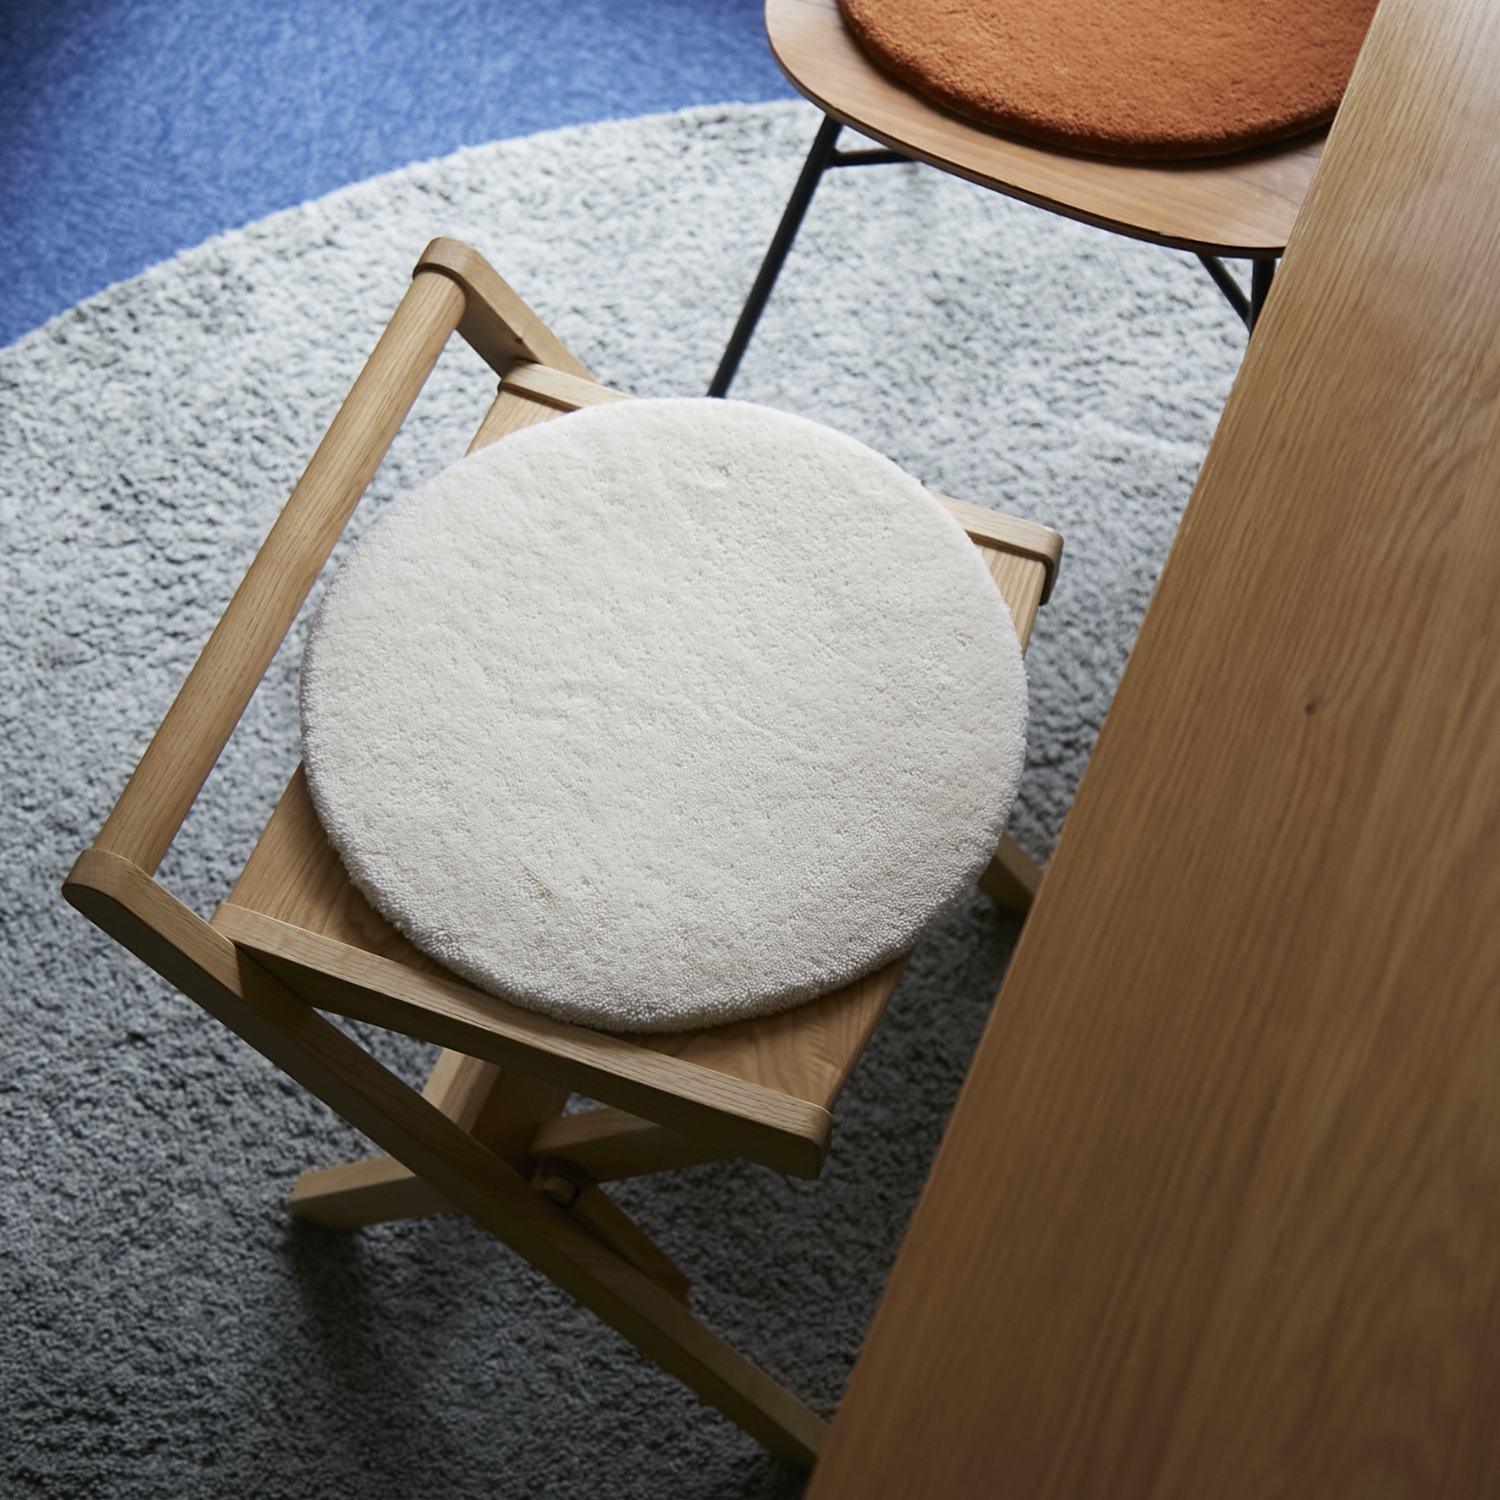 Accessories For CARPET LIFE/WOOL CHAIR PAD